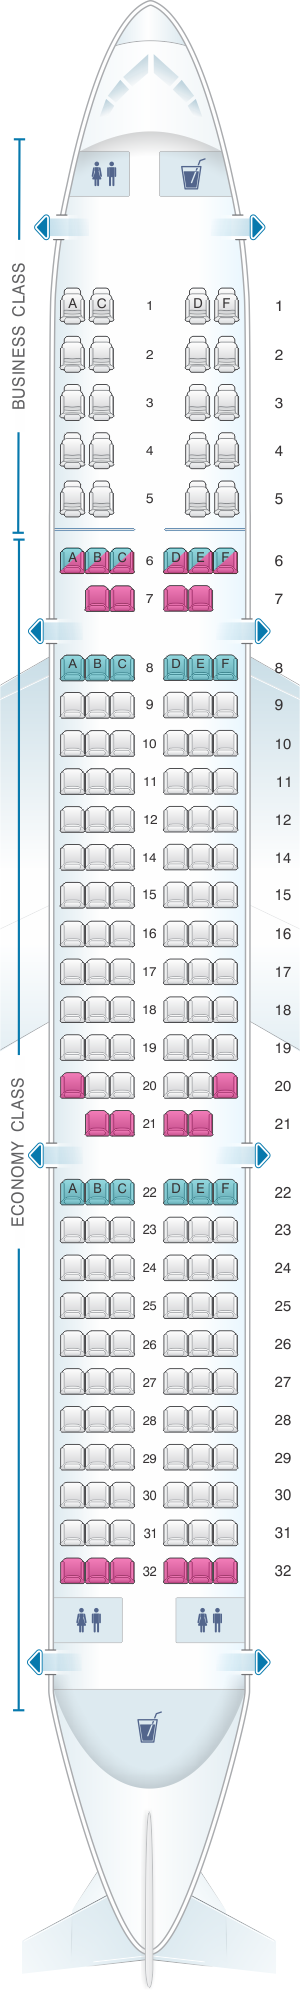 Seat map for Air India Airbus A321